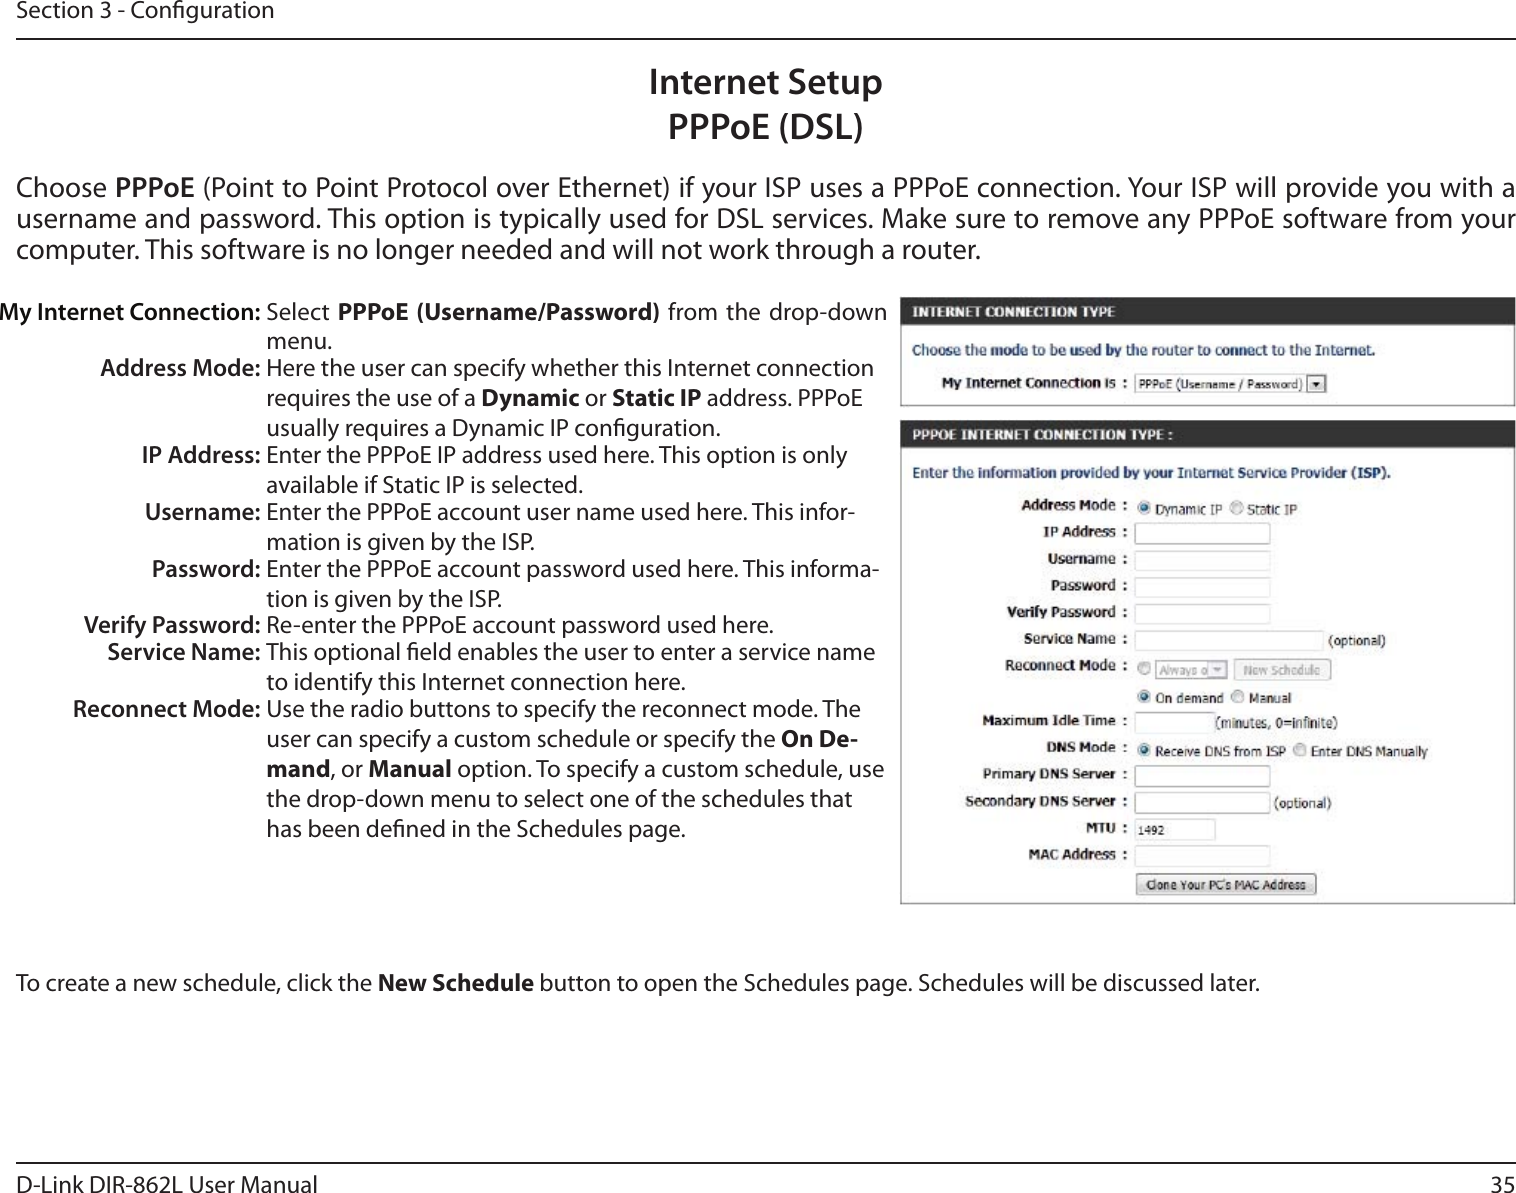 35D-Link DIR-862L User ManualSection 3 - CongurationInternet SetupPPPoE (DSL)Choose PPPoE (Point to Point Protocol over Ethernet) if your ISP uses a PPPoE connection. Your ISP will provide you with a username and password. This option is typically used for DSL services. Make sure to remove any PPPoE software from your computer. This software is no longer needed and will not work through a router.My Internet Connection: Select PPPoE (Username/Password) from the drop-down menu.Address Mode: Here the user can specify whether this Internet connection requires the use of a Dynamic or Static IP address. PPPoE usually requires a Dynamic IP conguration.IP Address: Enter the PPPoE IP address used here. This option is only available if Static IP is selected.Username: Enter the PPPoE account user name used here. This infor-mation is given by the ISP.Password: Enter the PPPoE account password used here. This informa-tion is given by the ISP.Verify Password: Re-enter the PPPoE account password used here.Service Name: This optional eld enables the user to enter a service name to identify this Internet connection here.Reconnect Mode: Use the radio buttons to specify the reconnect mode. The user can specify a custom schedule or specify the On De-mand, or Manual option. To specify a custom schedule, use the drop-down menu to select one of the schedules that has been dened in the Schedules page.To create a new schedule, click the New Schedule button to open the Schedules page. Schedules will be discussed later.